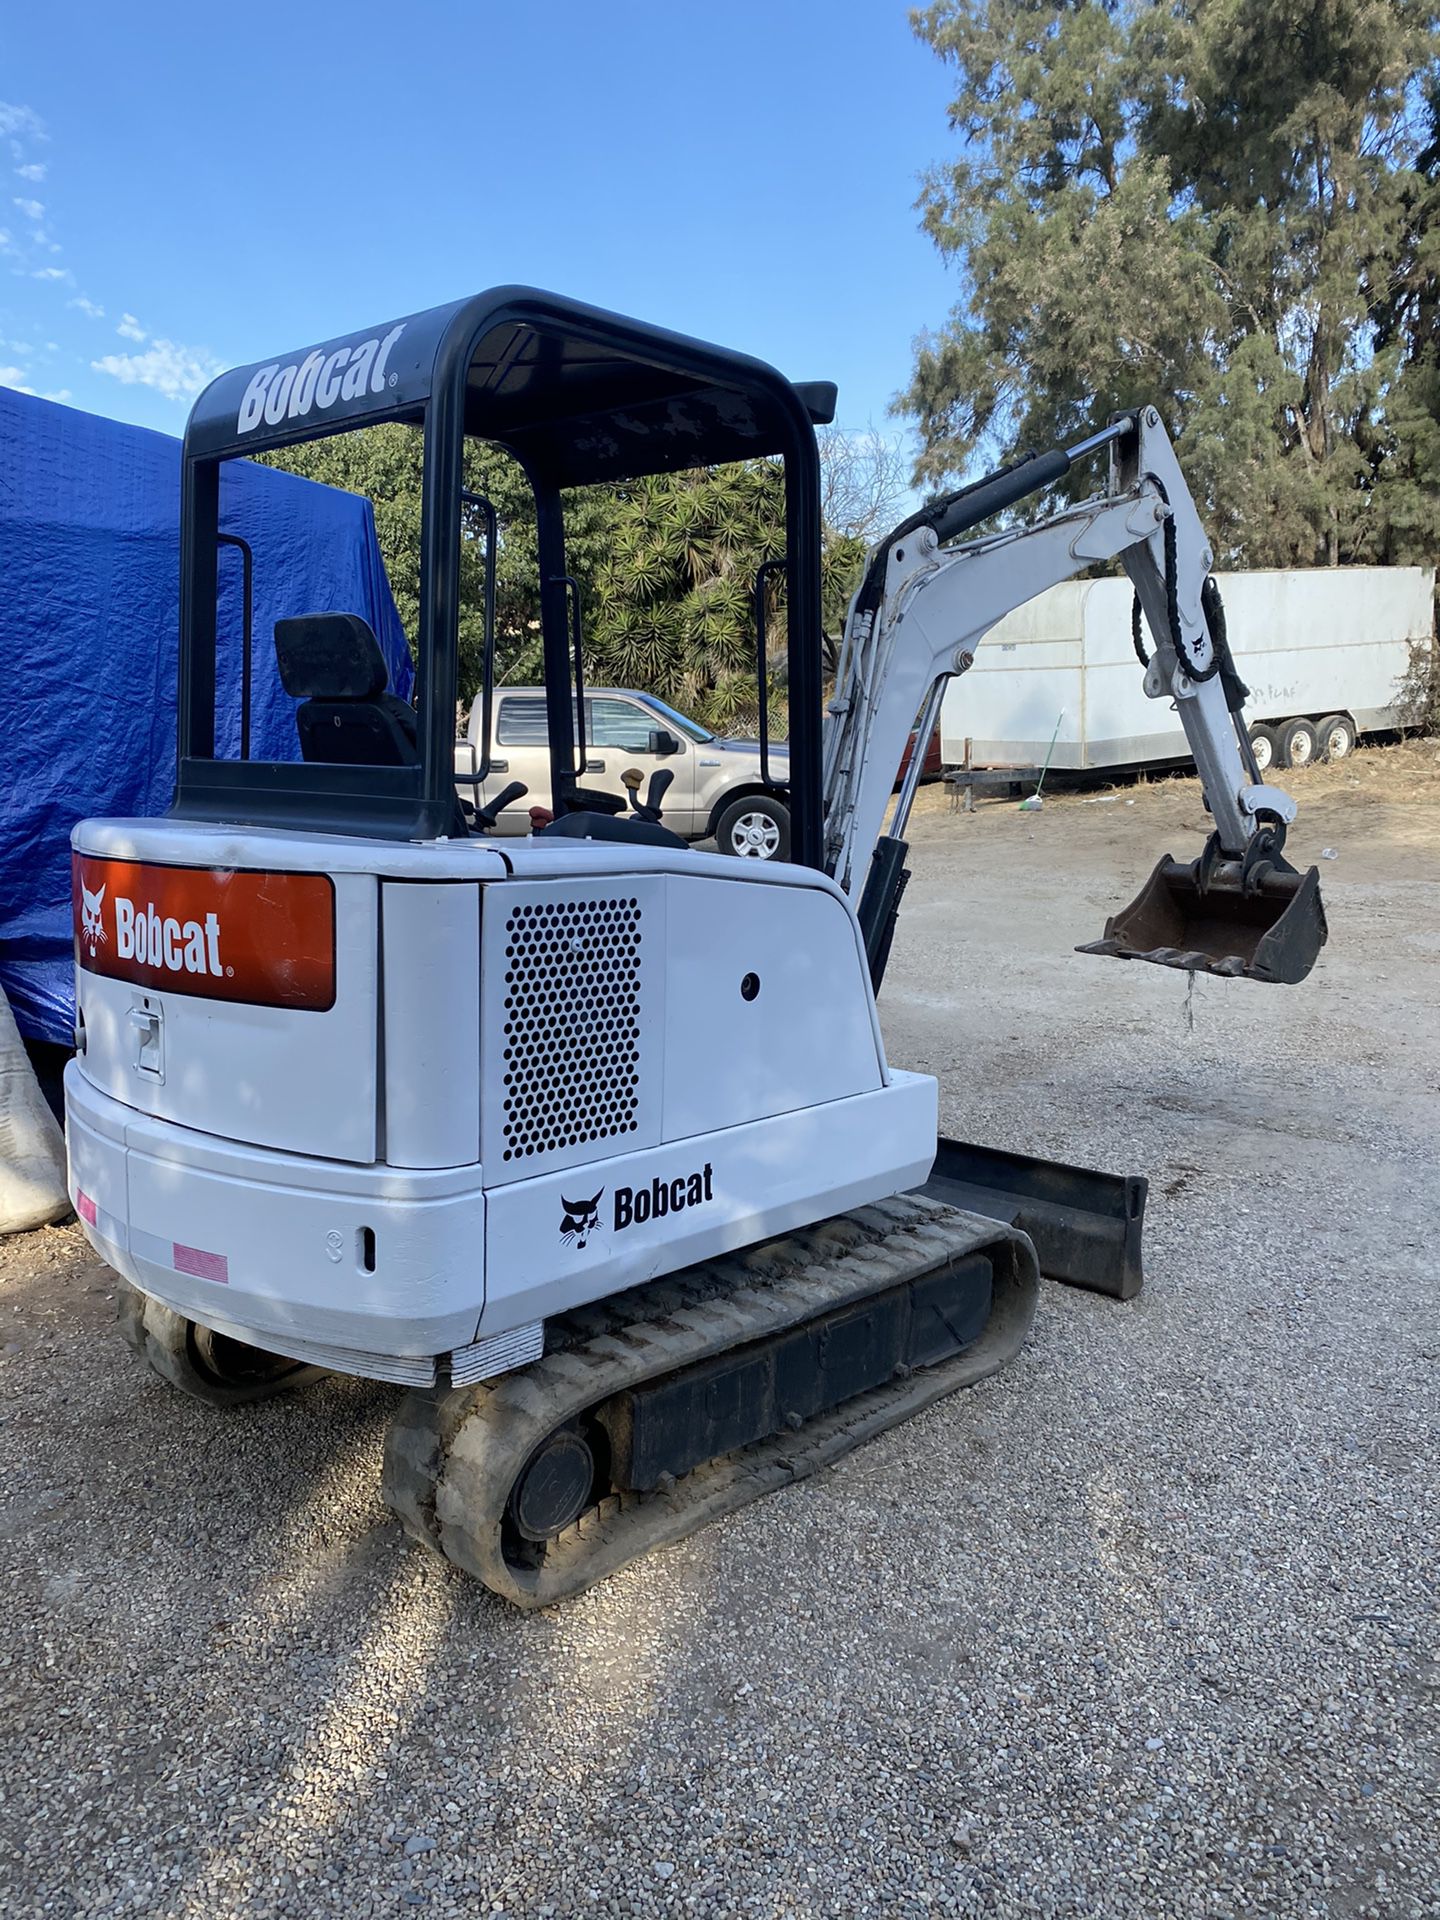 BobCat Mini Excavator Model 328 Very good condition and very well taken care of. No oil leaks!!! Only has 2180 hrs. Asking 16,900 OBO Buenas condic